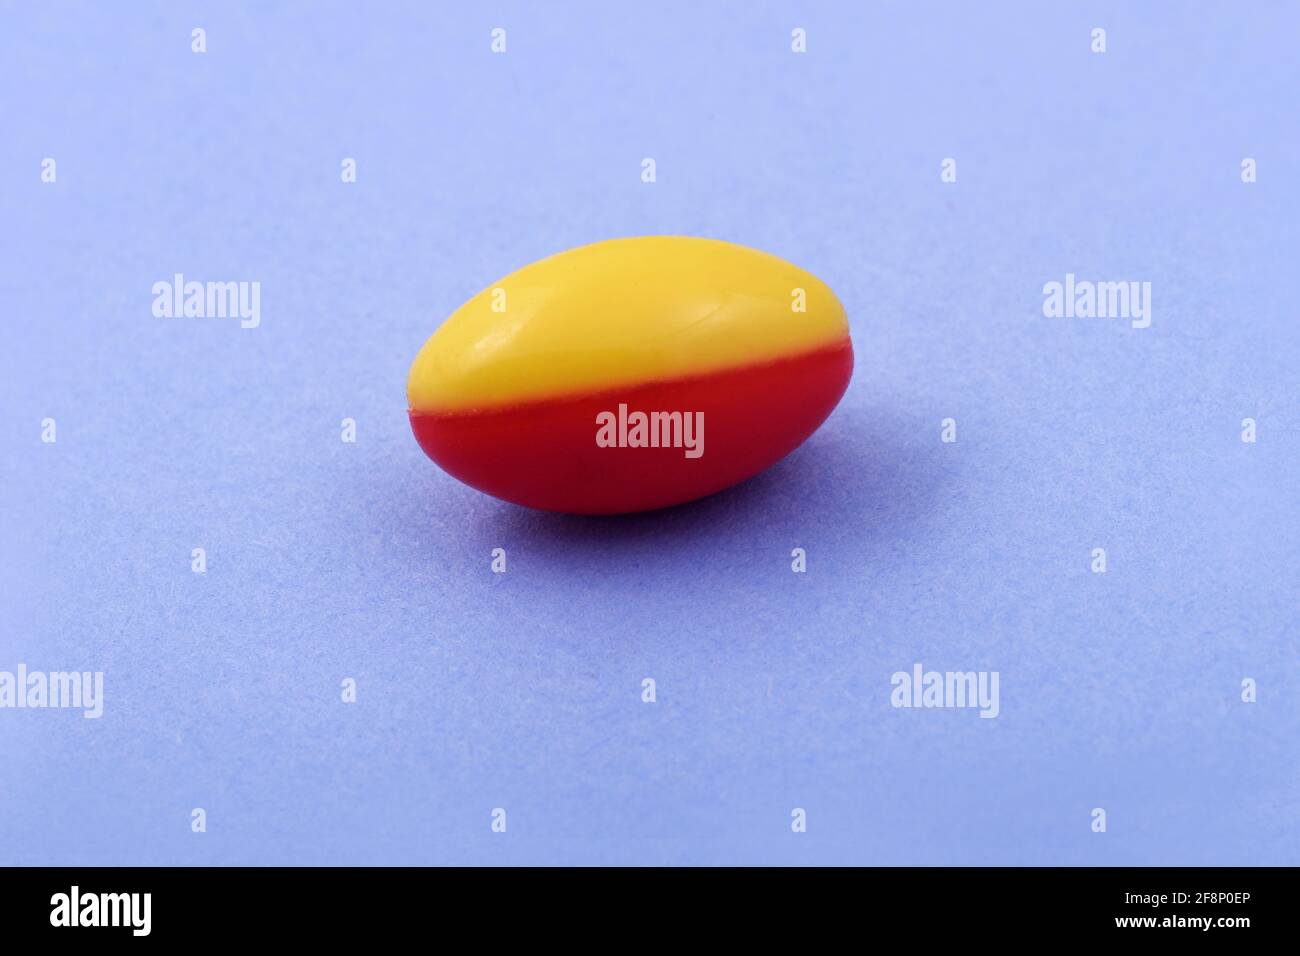 Red and yellow capsule Pharmaceutical medicine tablet on Blue background, Flat lay Copy space Medicine concepts Light blue color background Stock Photo